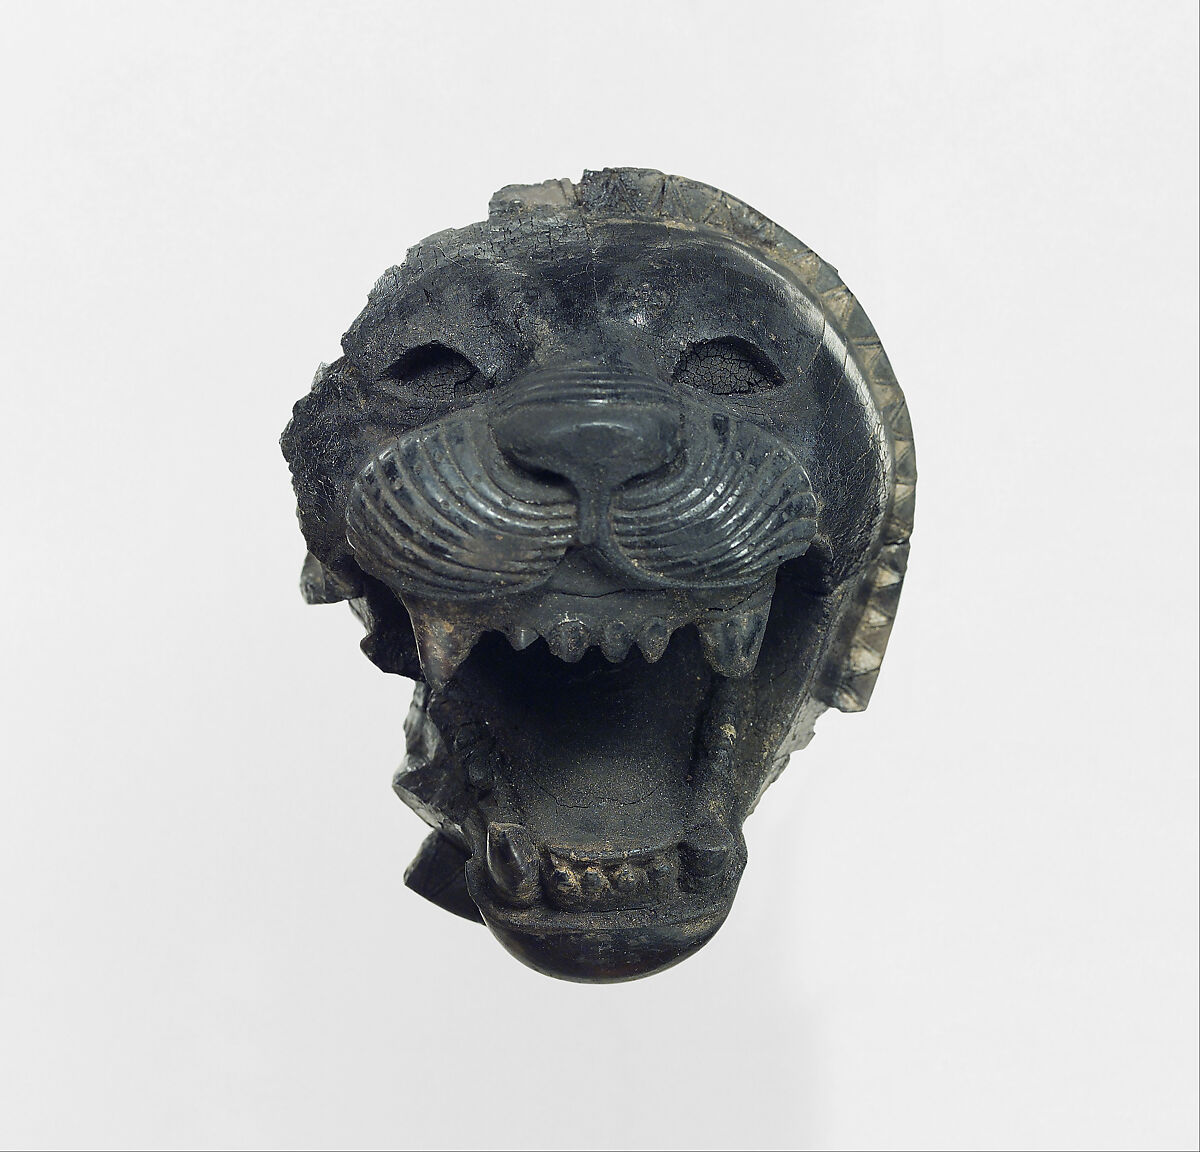 Furniture element carved in the round with the head of a roaring lion